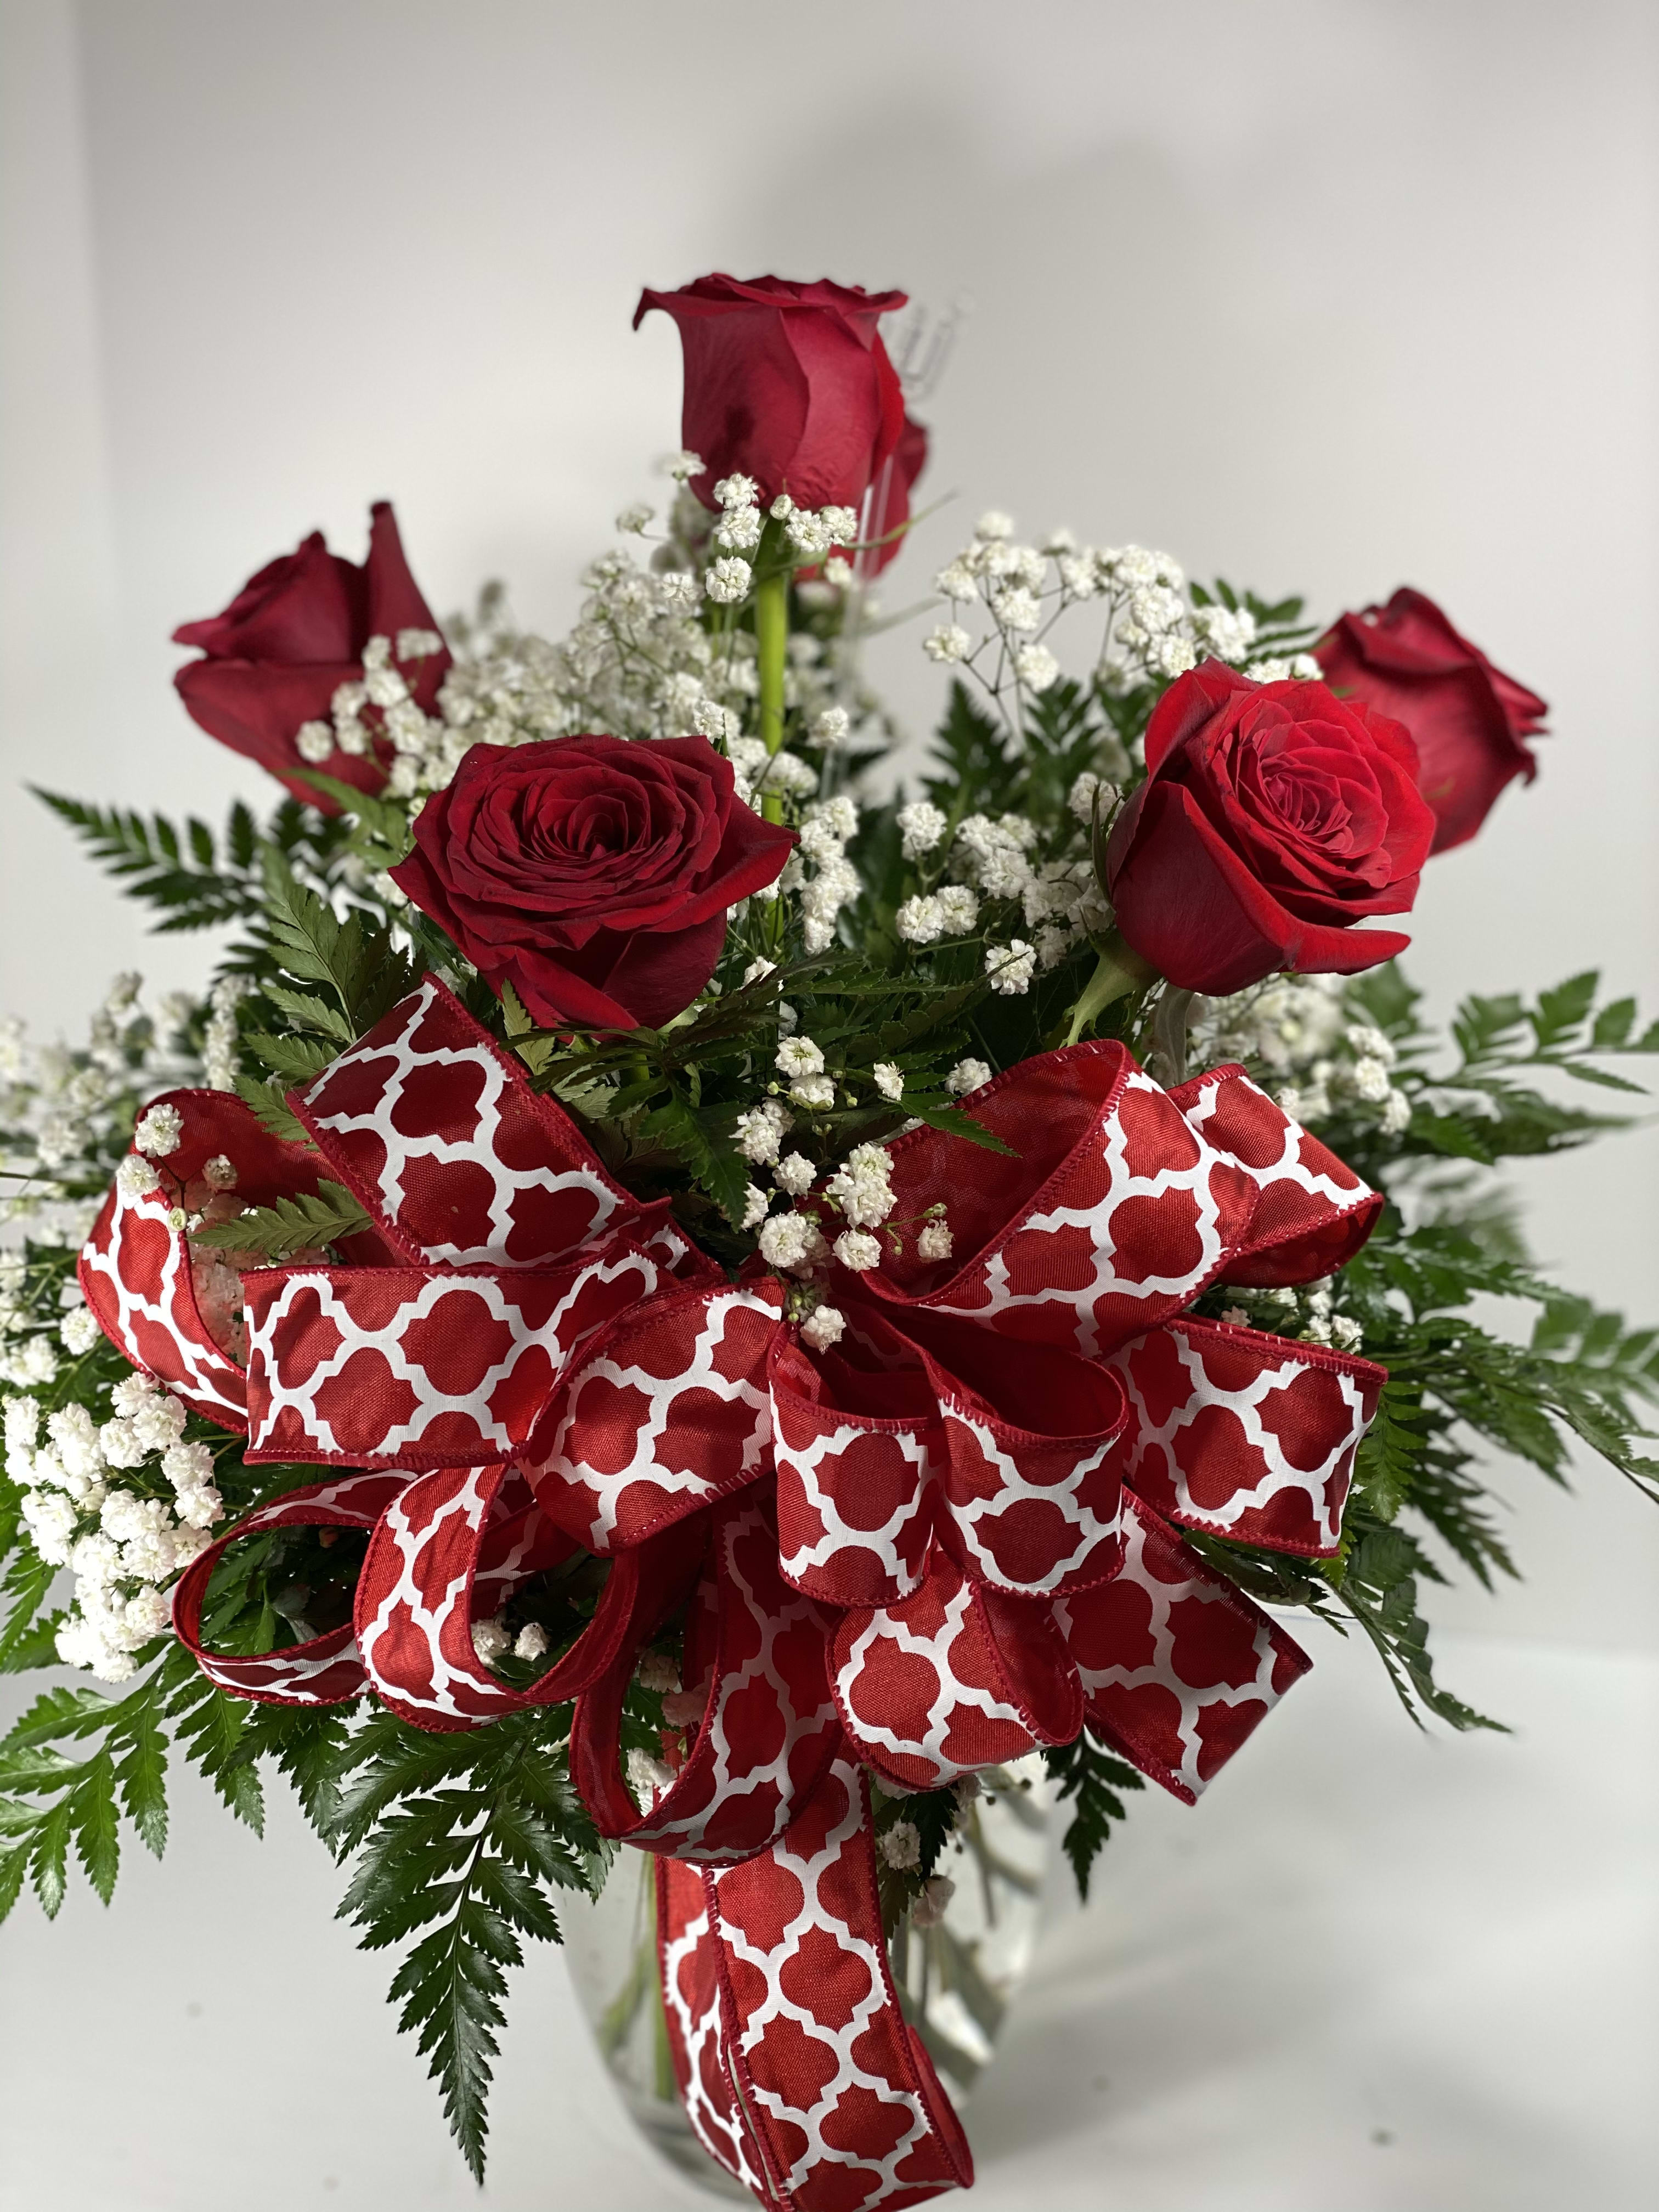 1/2 Dozen Long Stem Red Roses - Brighten any celebration with a beautiful and brilliant bouquet of premium long-stem red roses. Hand-designed, it's a stylish and vibrant gift that's sure to bring smiles to their day. Our florists select only the finest, freshest long-stem red roses and arrange them by hand with fresh gypsophila in a classic glass vase.